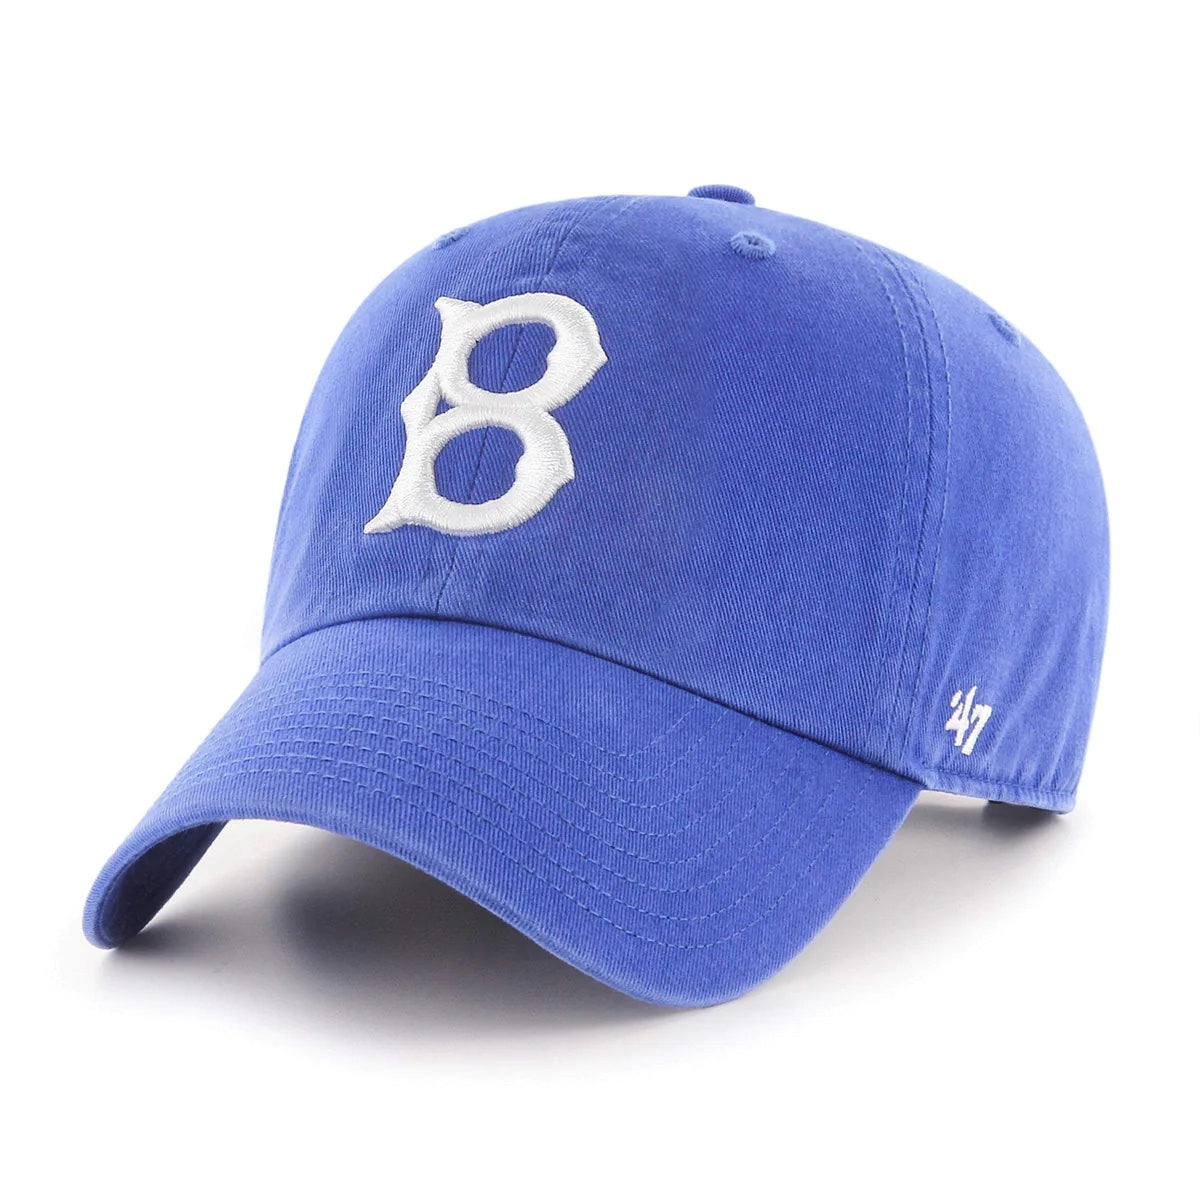 47 Brand Brooklyn Dodgers Cooperstown Clean Up Hat - Blue/White - Leaside Hockey Shop Inc.